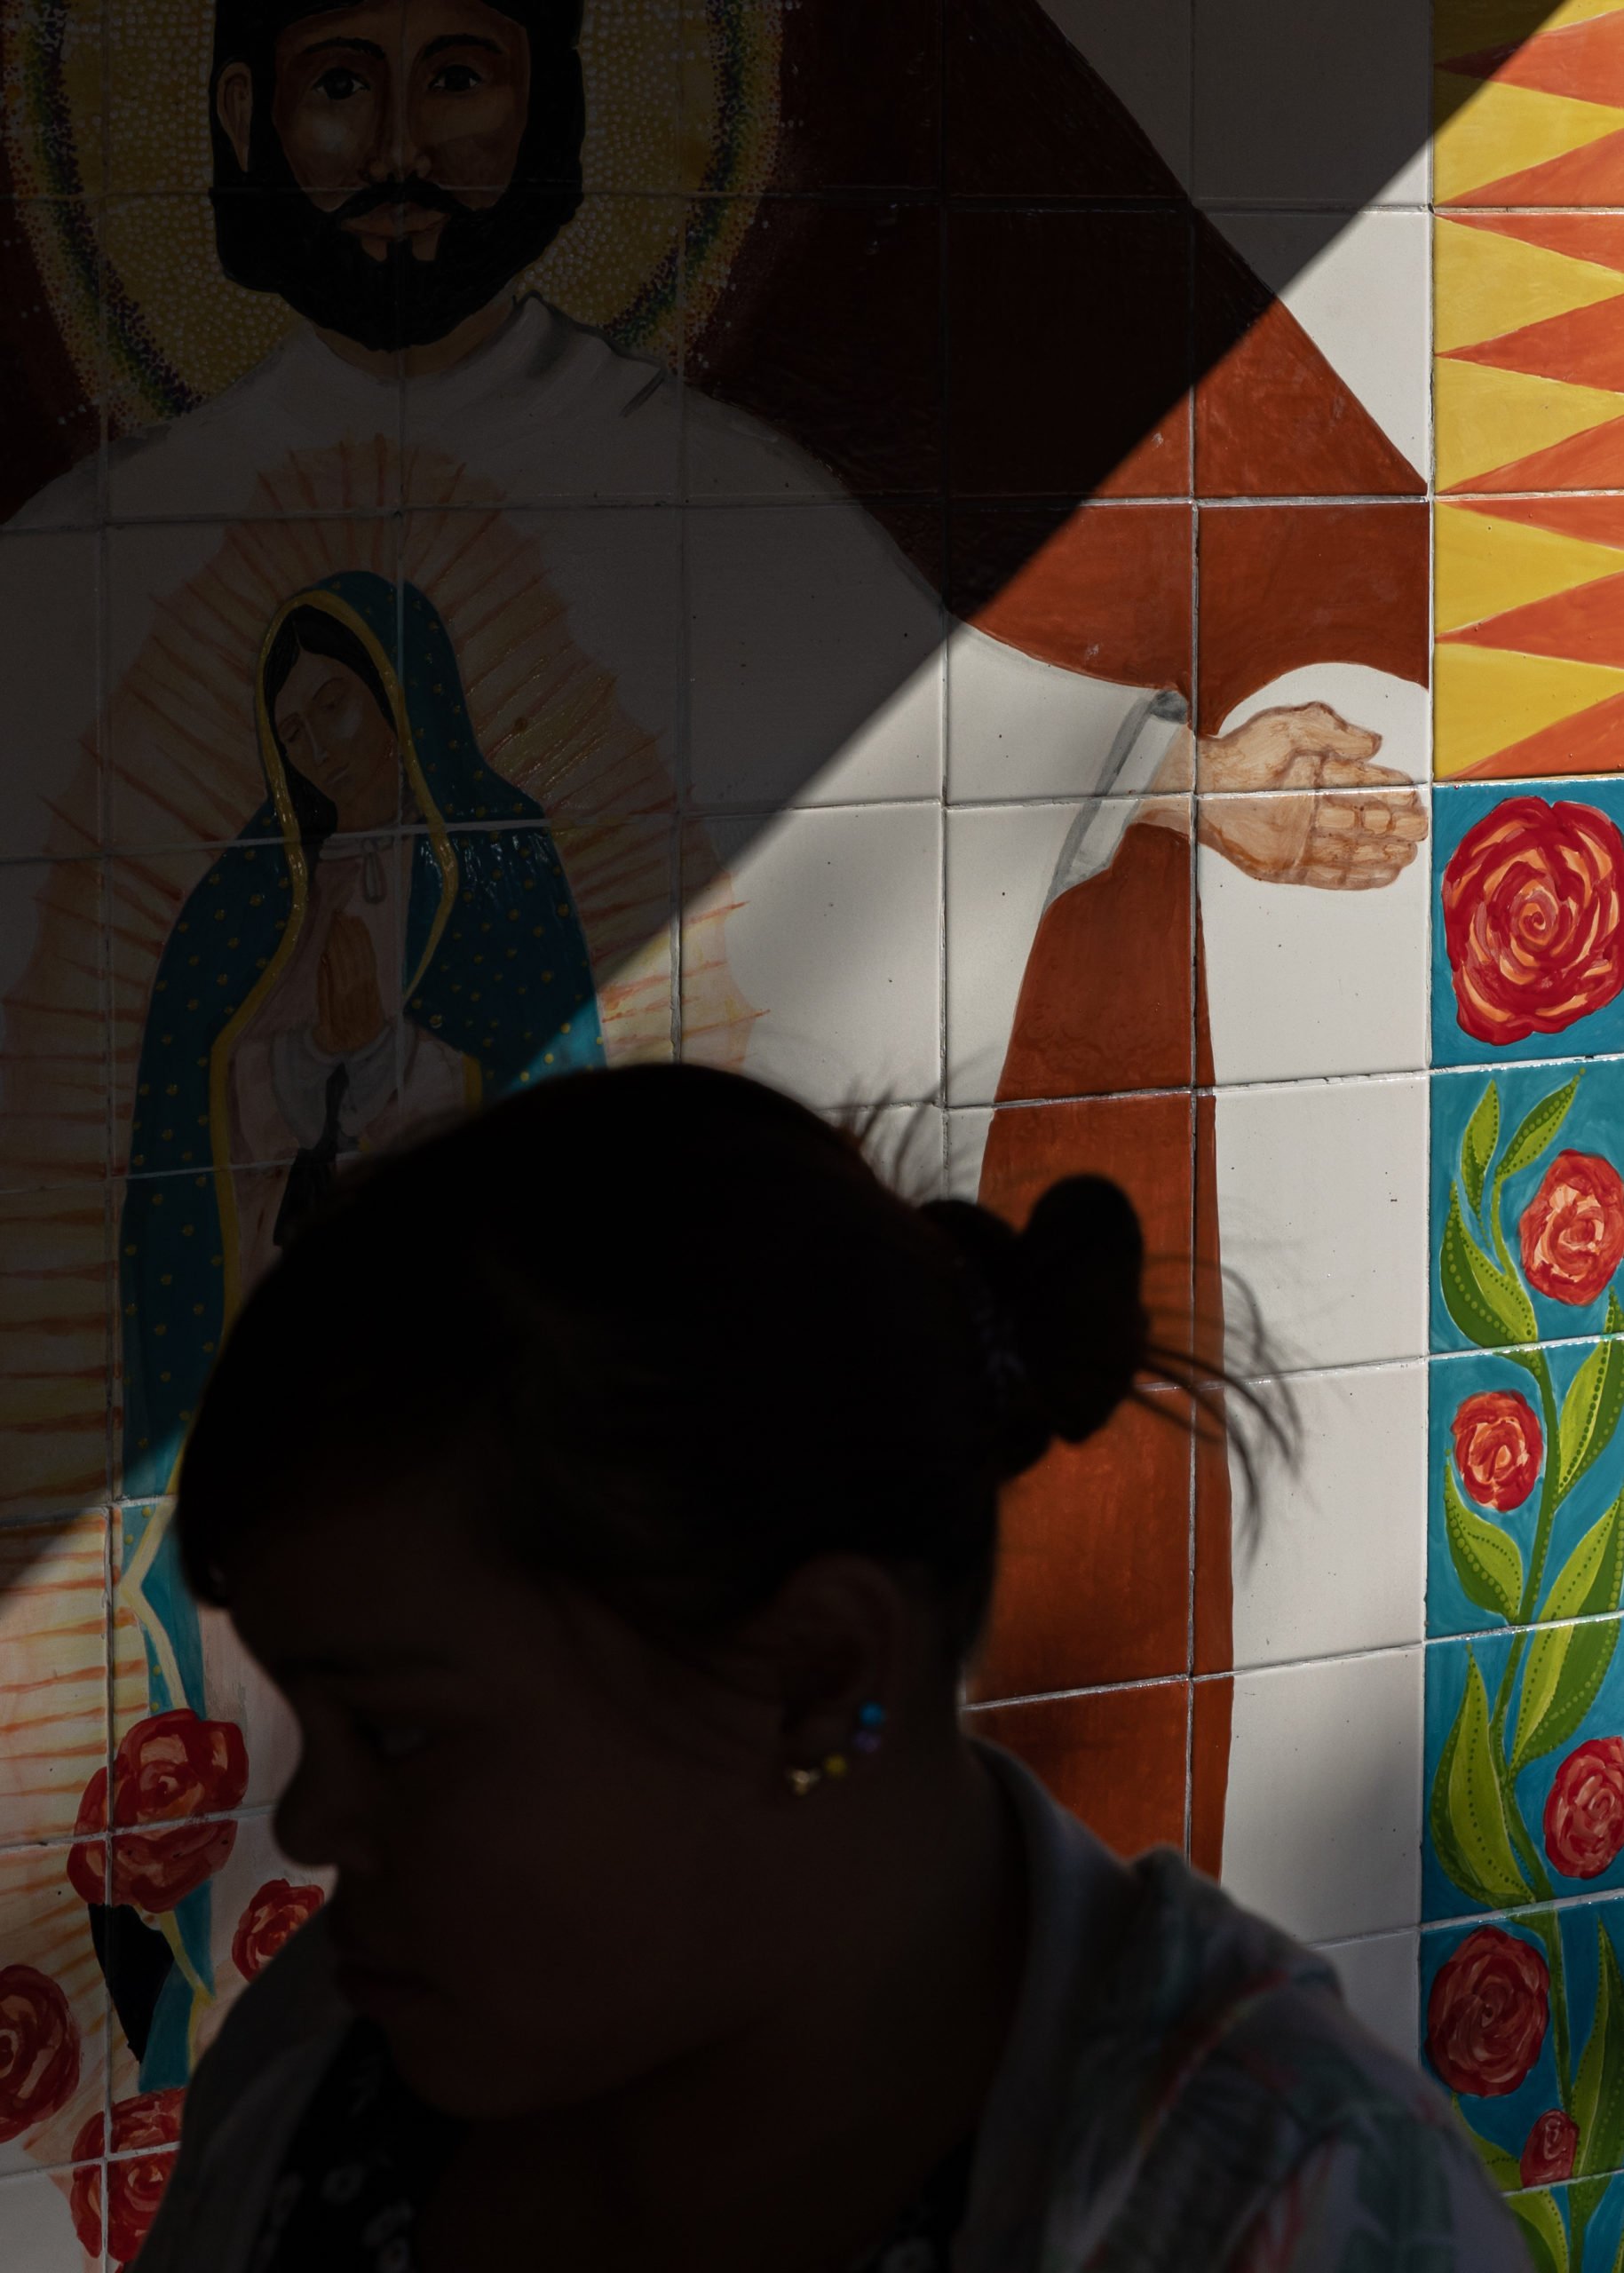 A person's face is silhoutted in shadow in front of a mosaic showing Jesus with outstretched arms, and the Virgin of Guadalupe inside his form. At the edges of the mosiac are painted roses and other bright colored tiles.